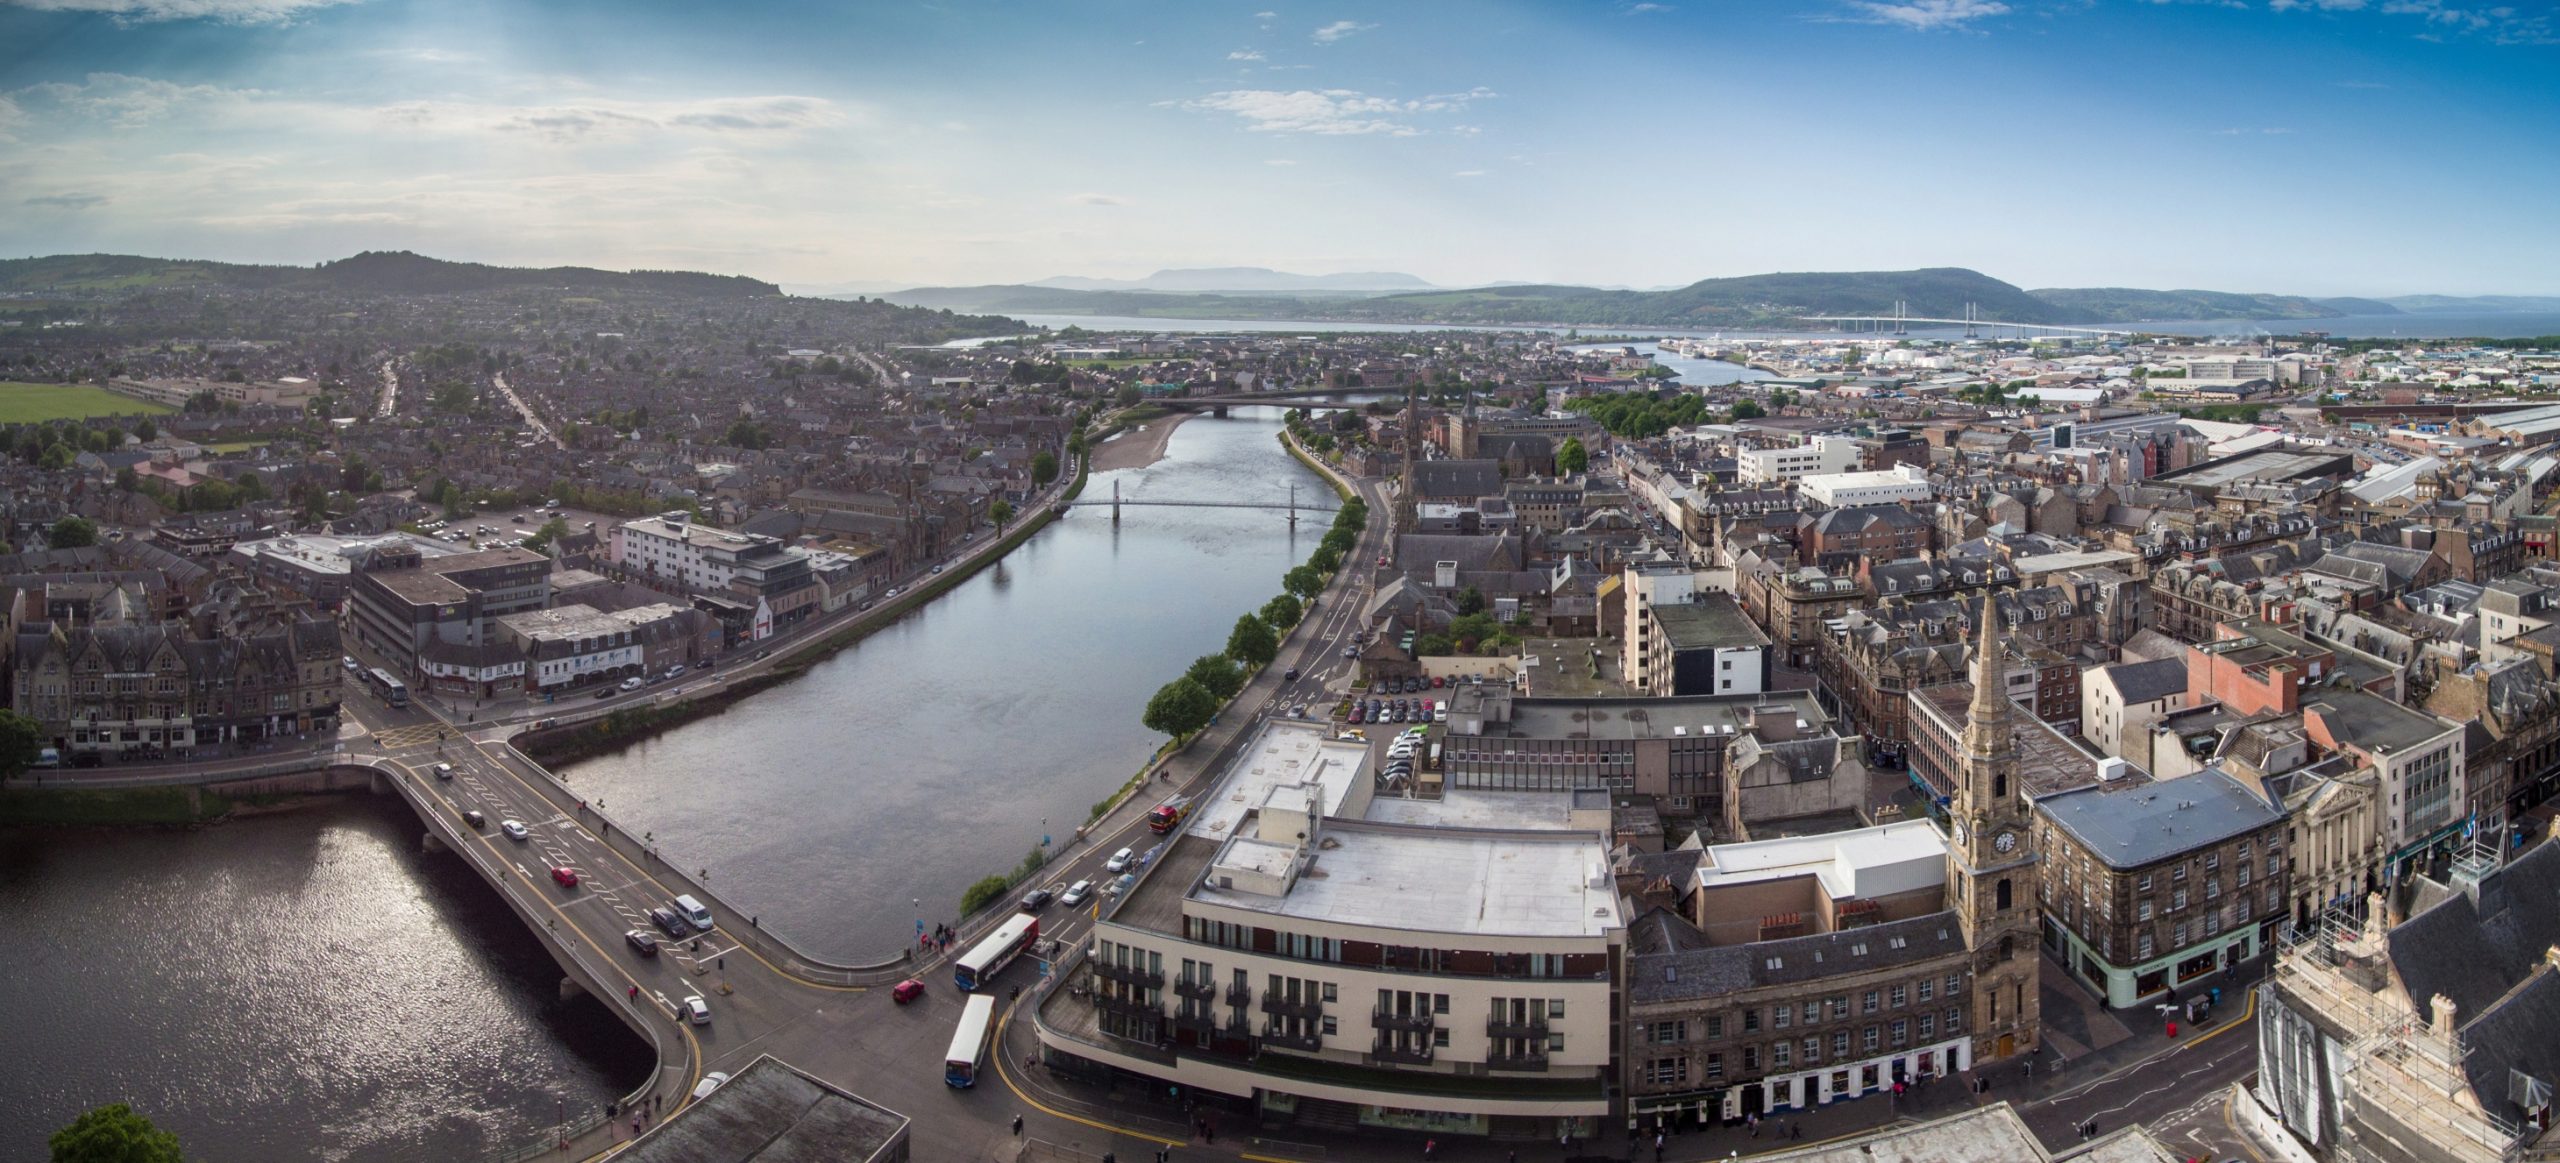 An aerial shot of Inverness city looking down the River Ness